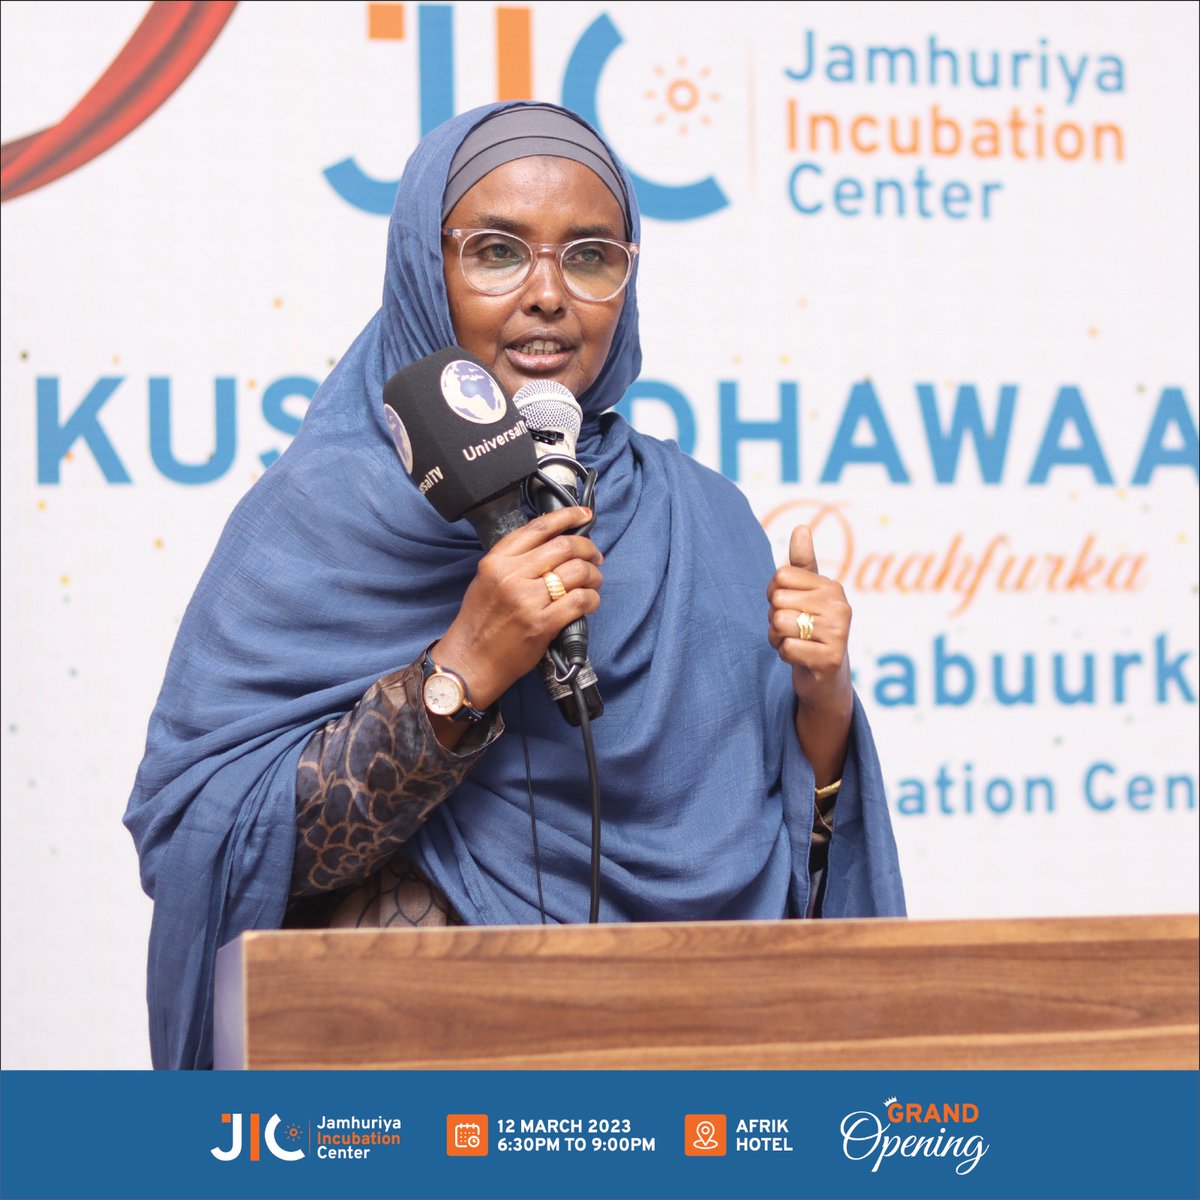 During her speech, the Co-founder of Somali Women In Business (@SWIB), emphasized the critical role that women entrepreneurs play in driving economic growth and promoting gender equality. She highlighted the challenges that women entrepreneurs face and 1/1